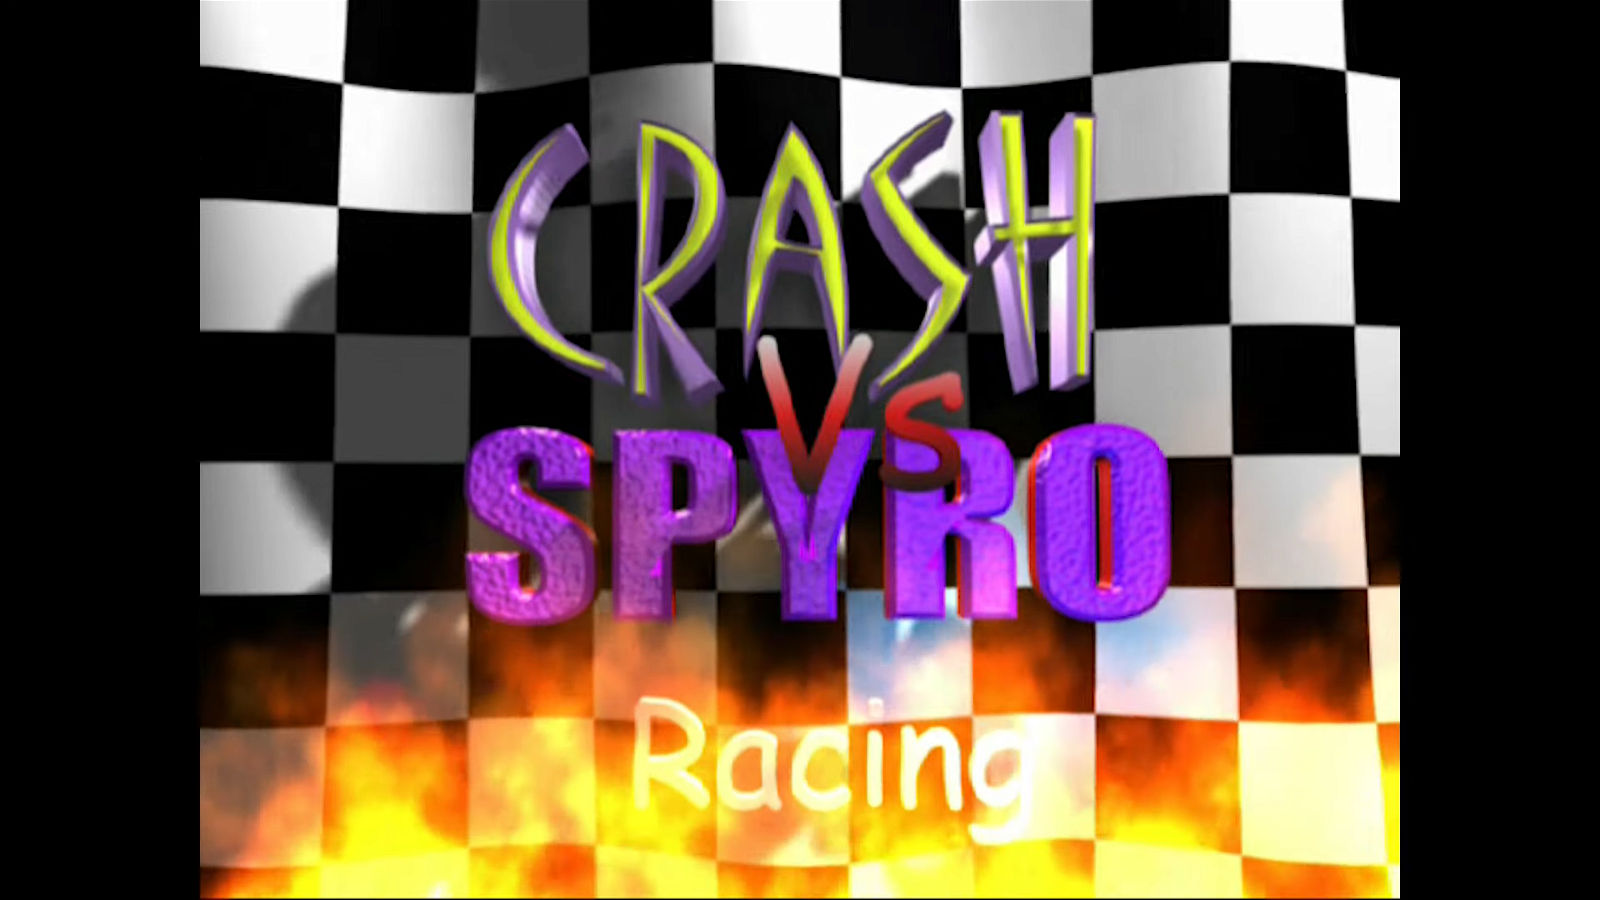 The Crash vs Spyro Racing game was found well preserved in an Xbox Dev Kit.